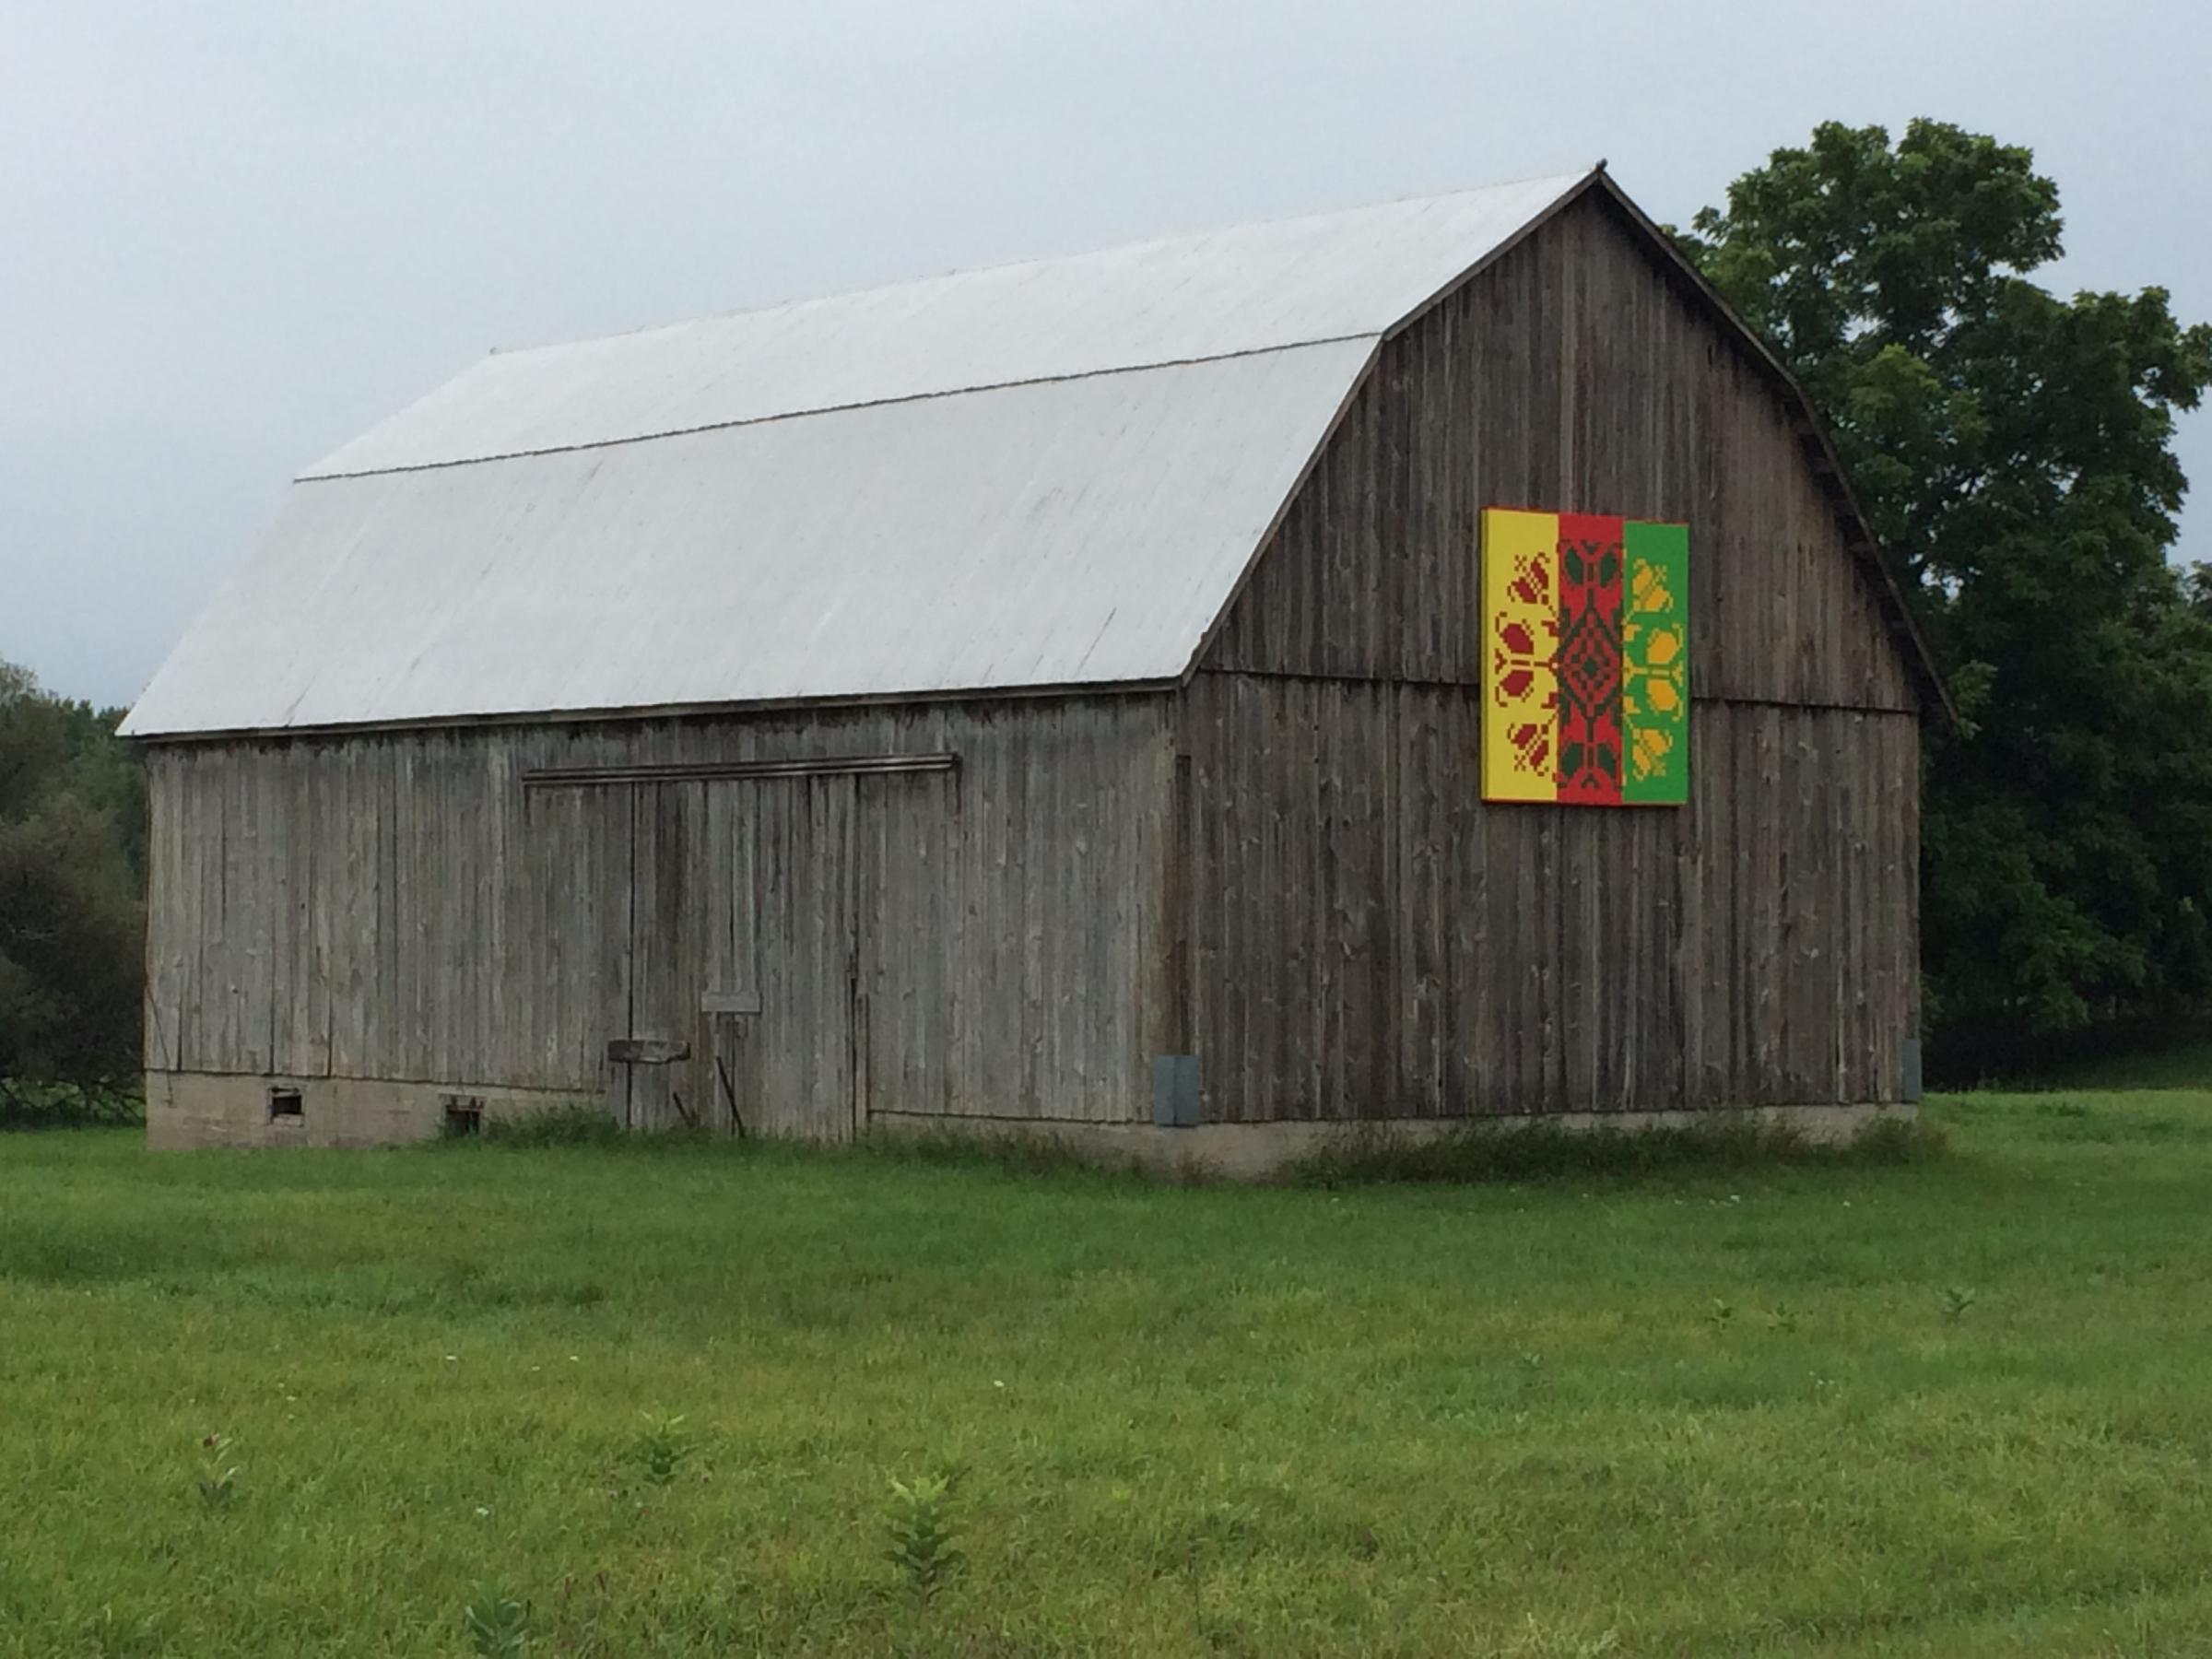 How can you paint a barn quilt?